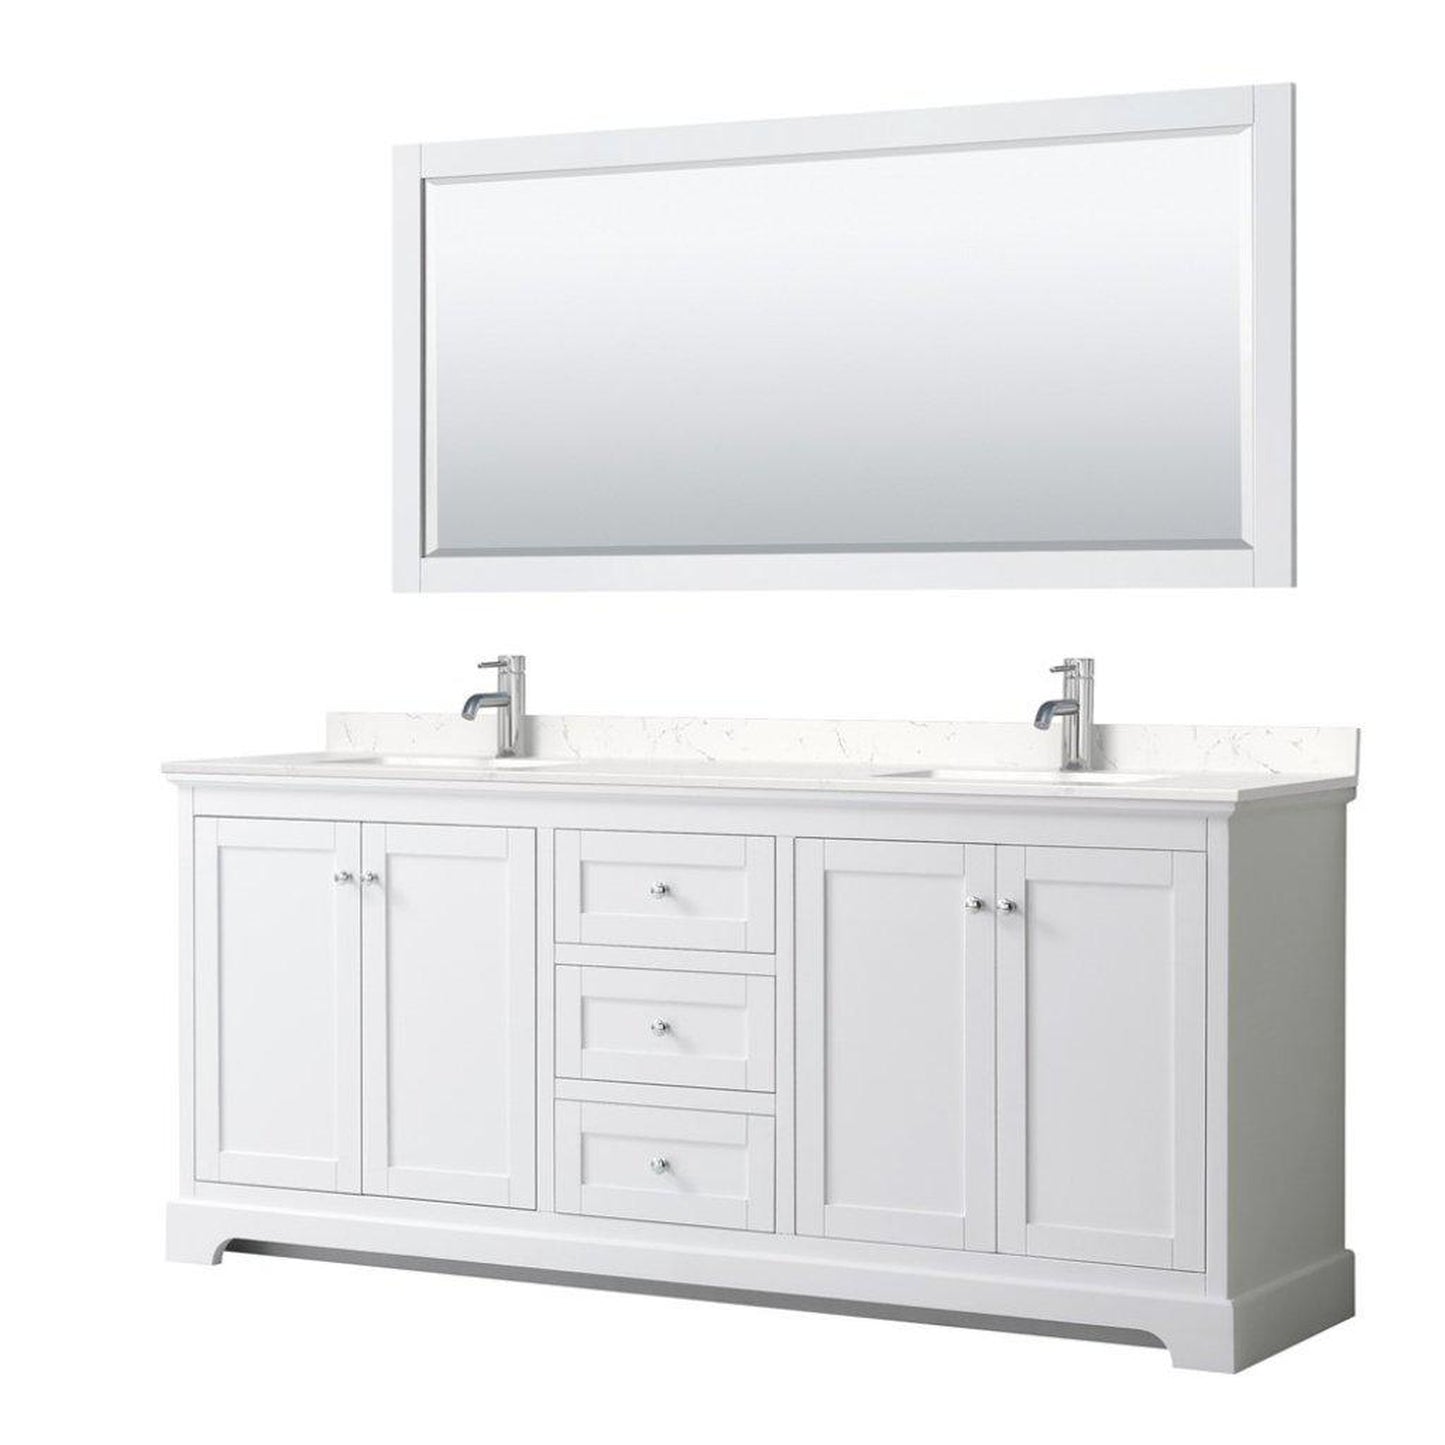 Wyndham Collection Avery 80" White Double Bathroom Vanity Set, Light-Vein Carrara Cultured Marble Countertop With 1-Hole Faucet, Square Sink, 70" Mirror, Polished Chrome Trims